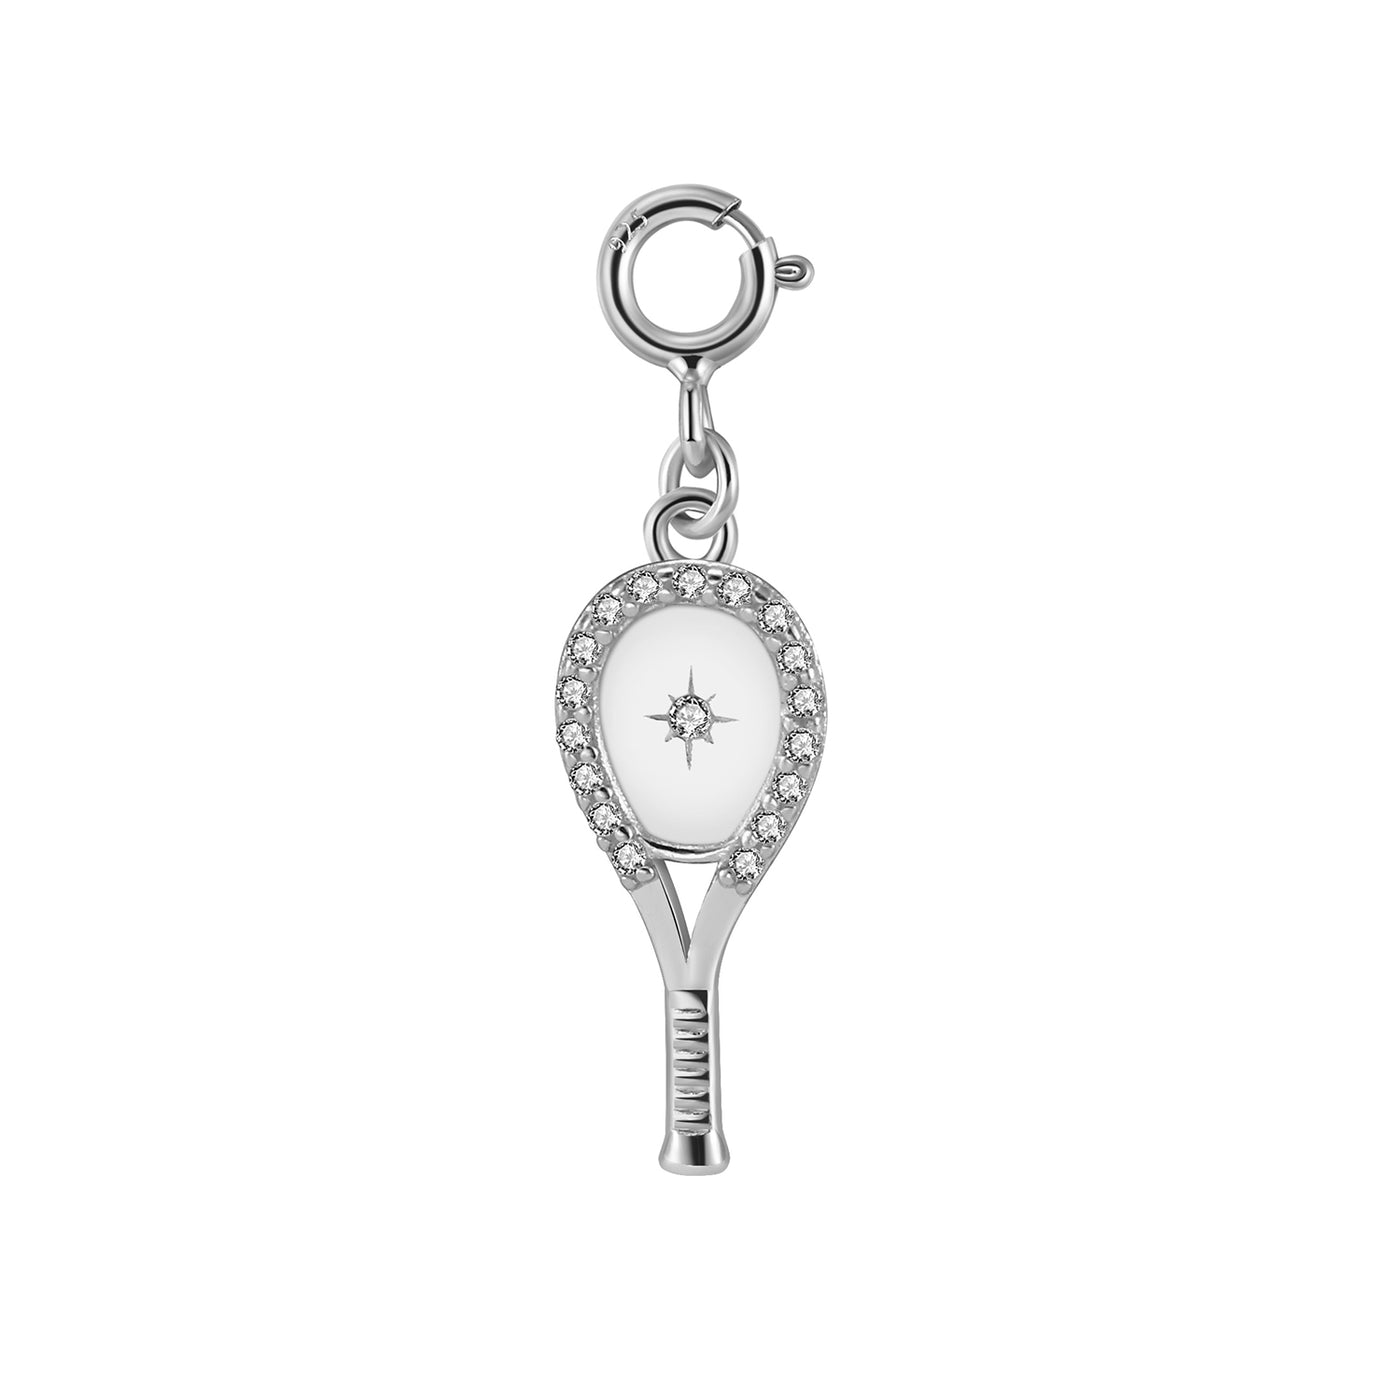 Tennis Racquet Necklace in Silver featuring a delicate tennis racquet pendant with sparkling crystal all around and an impact center stone hangs from a chic, modern paper clip style chain - 16" with a 2" extender.